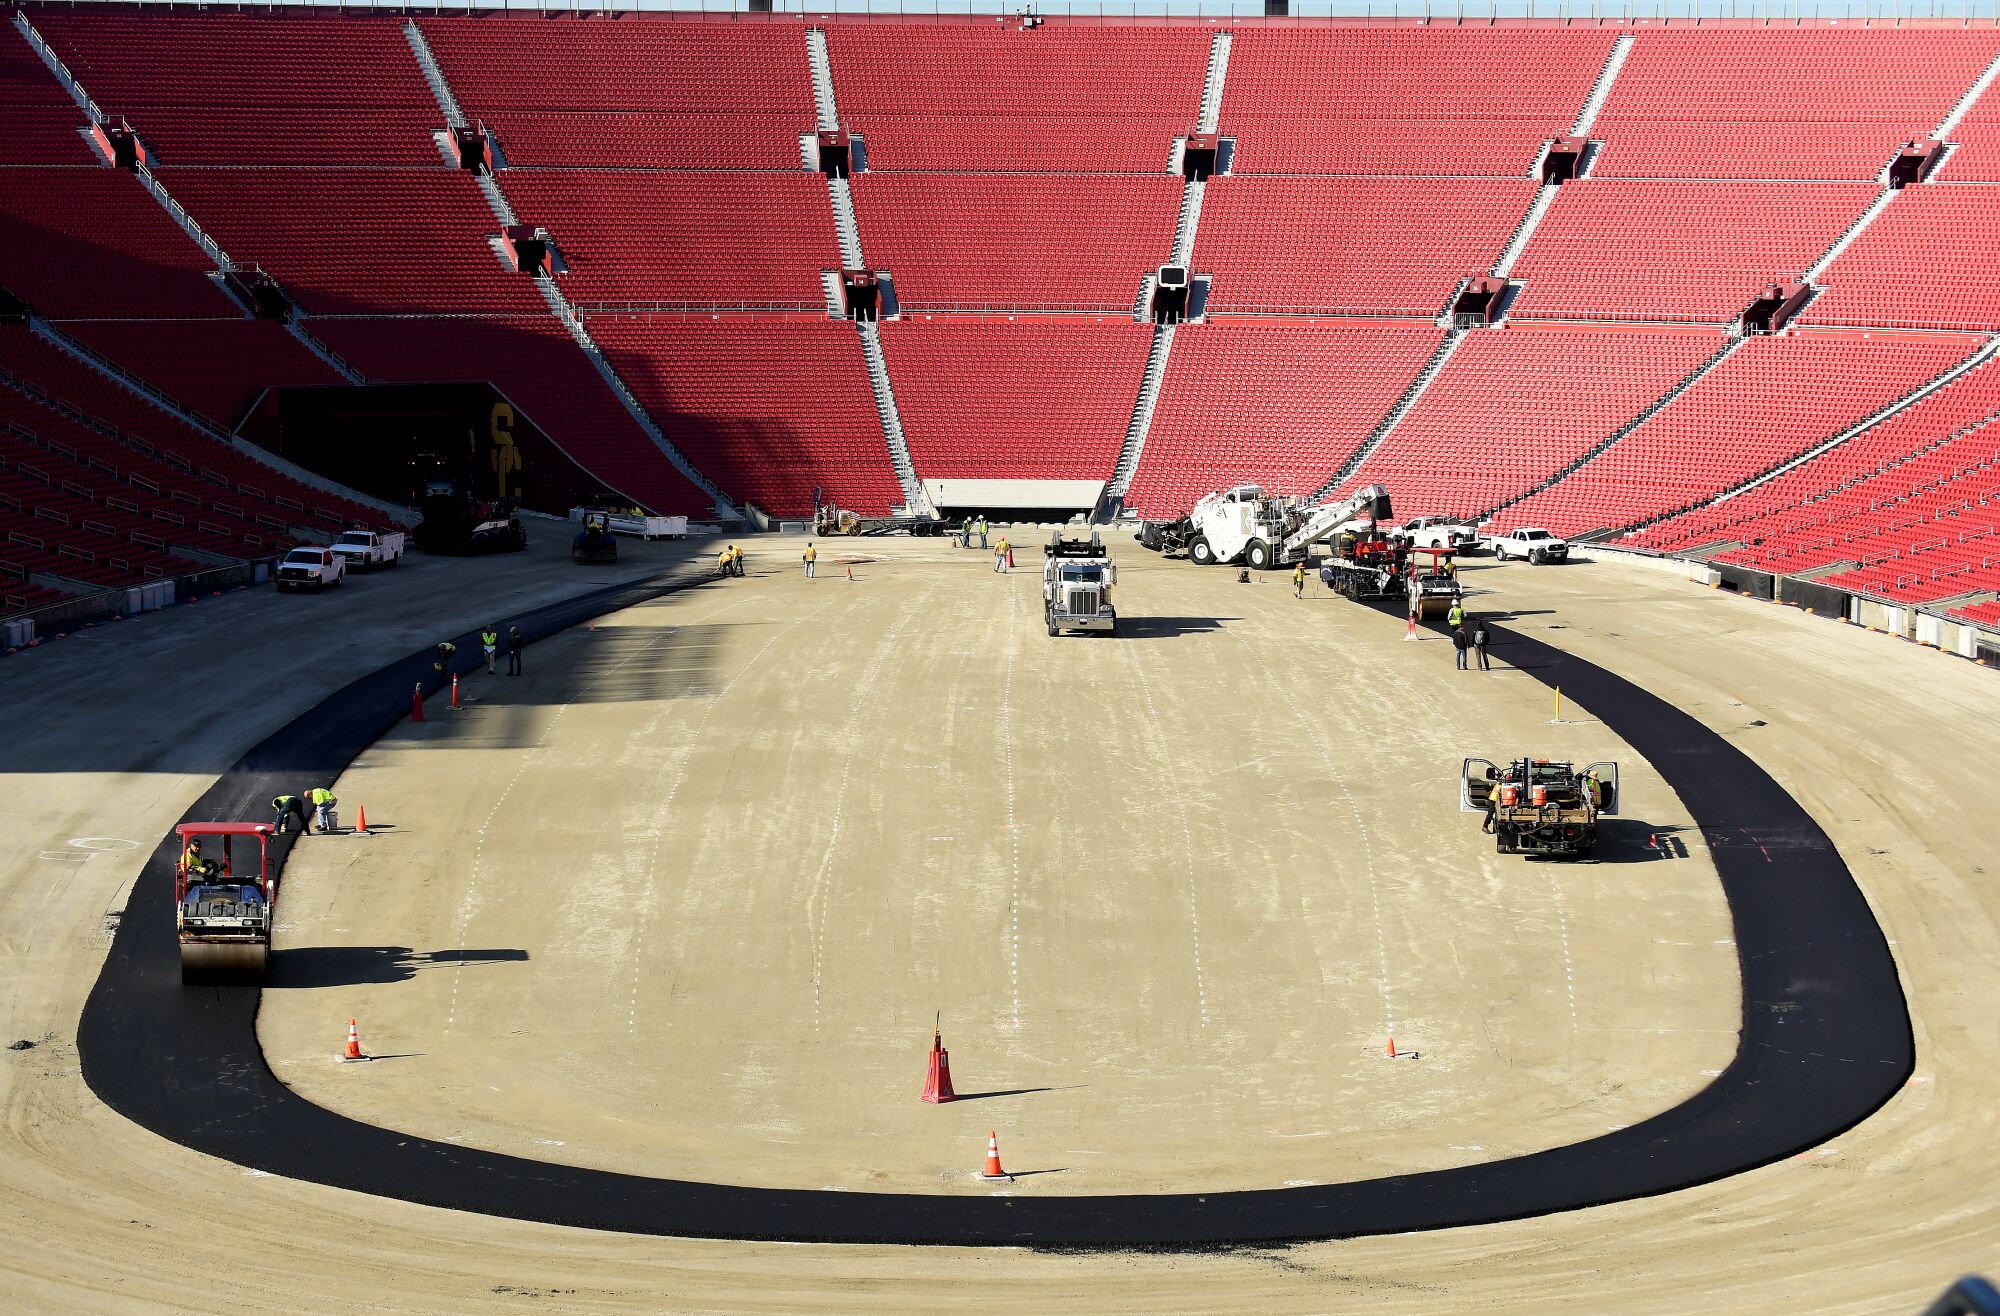 Work crews begin paving the track at the Coliseum in preparation for a NASCAR race.